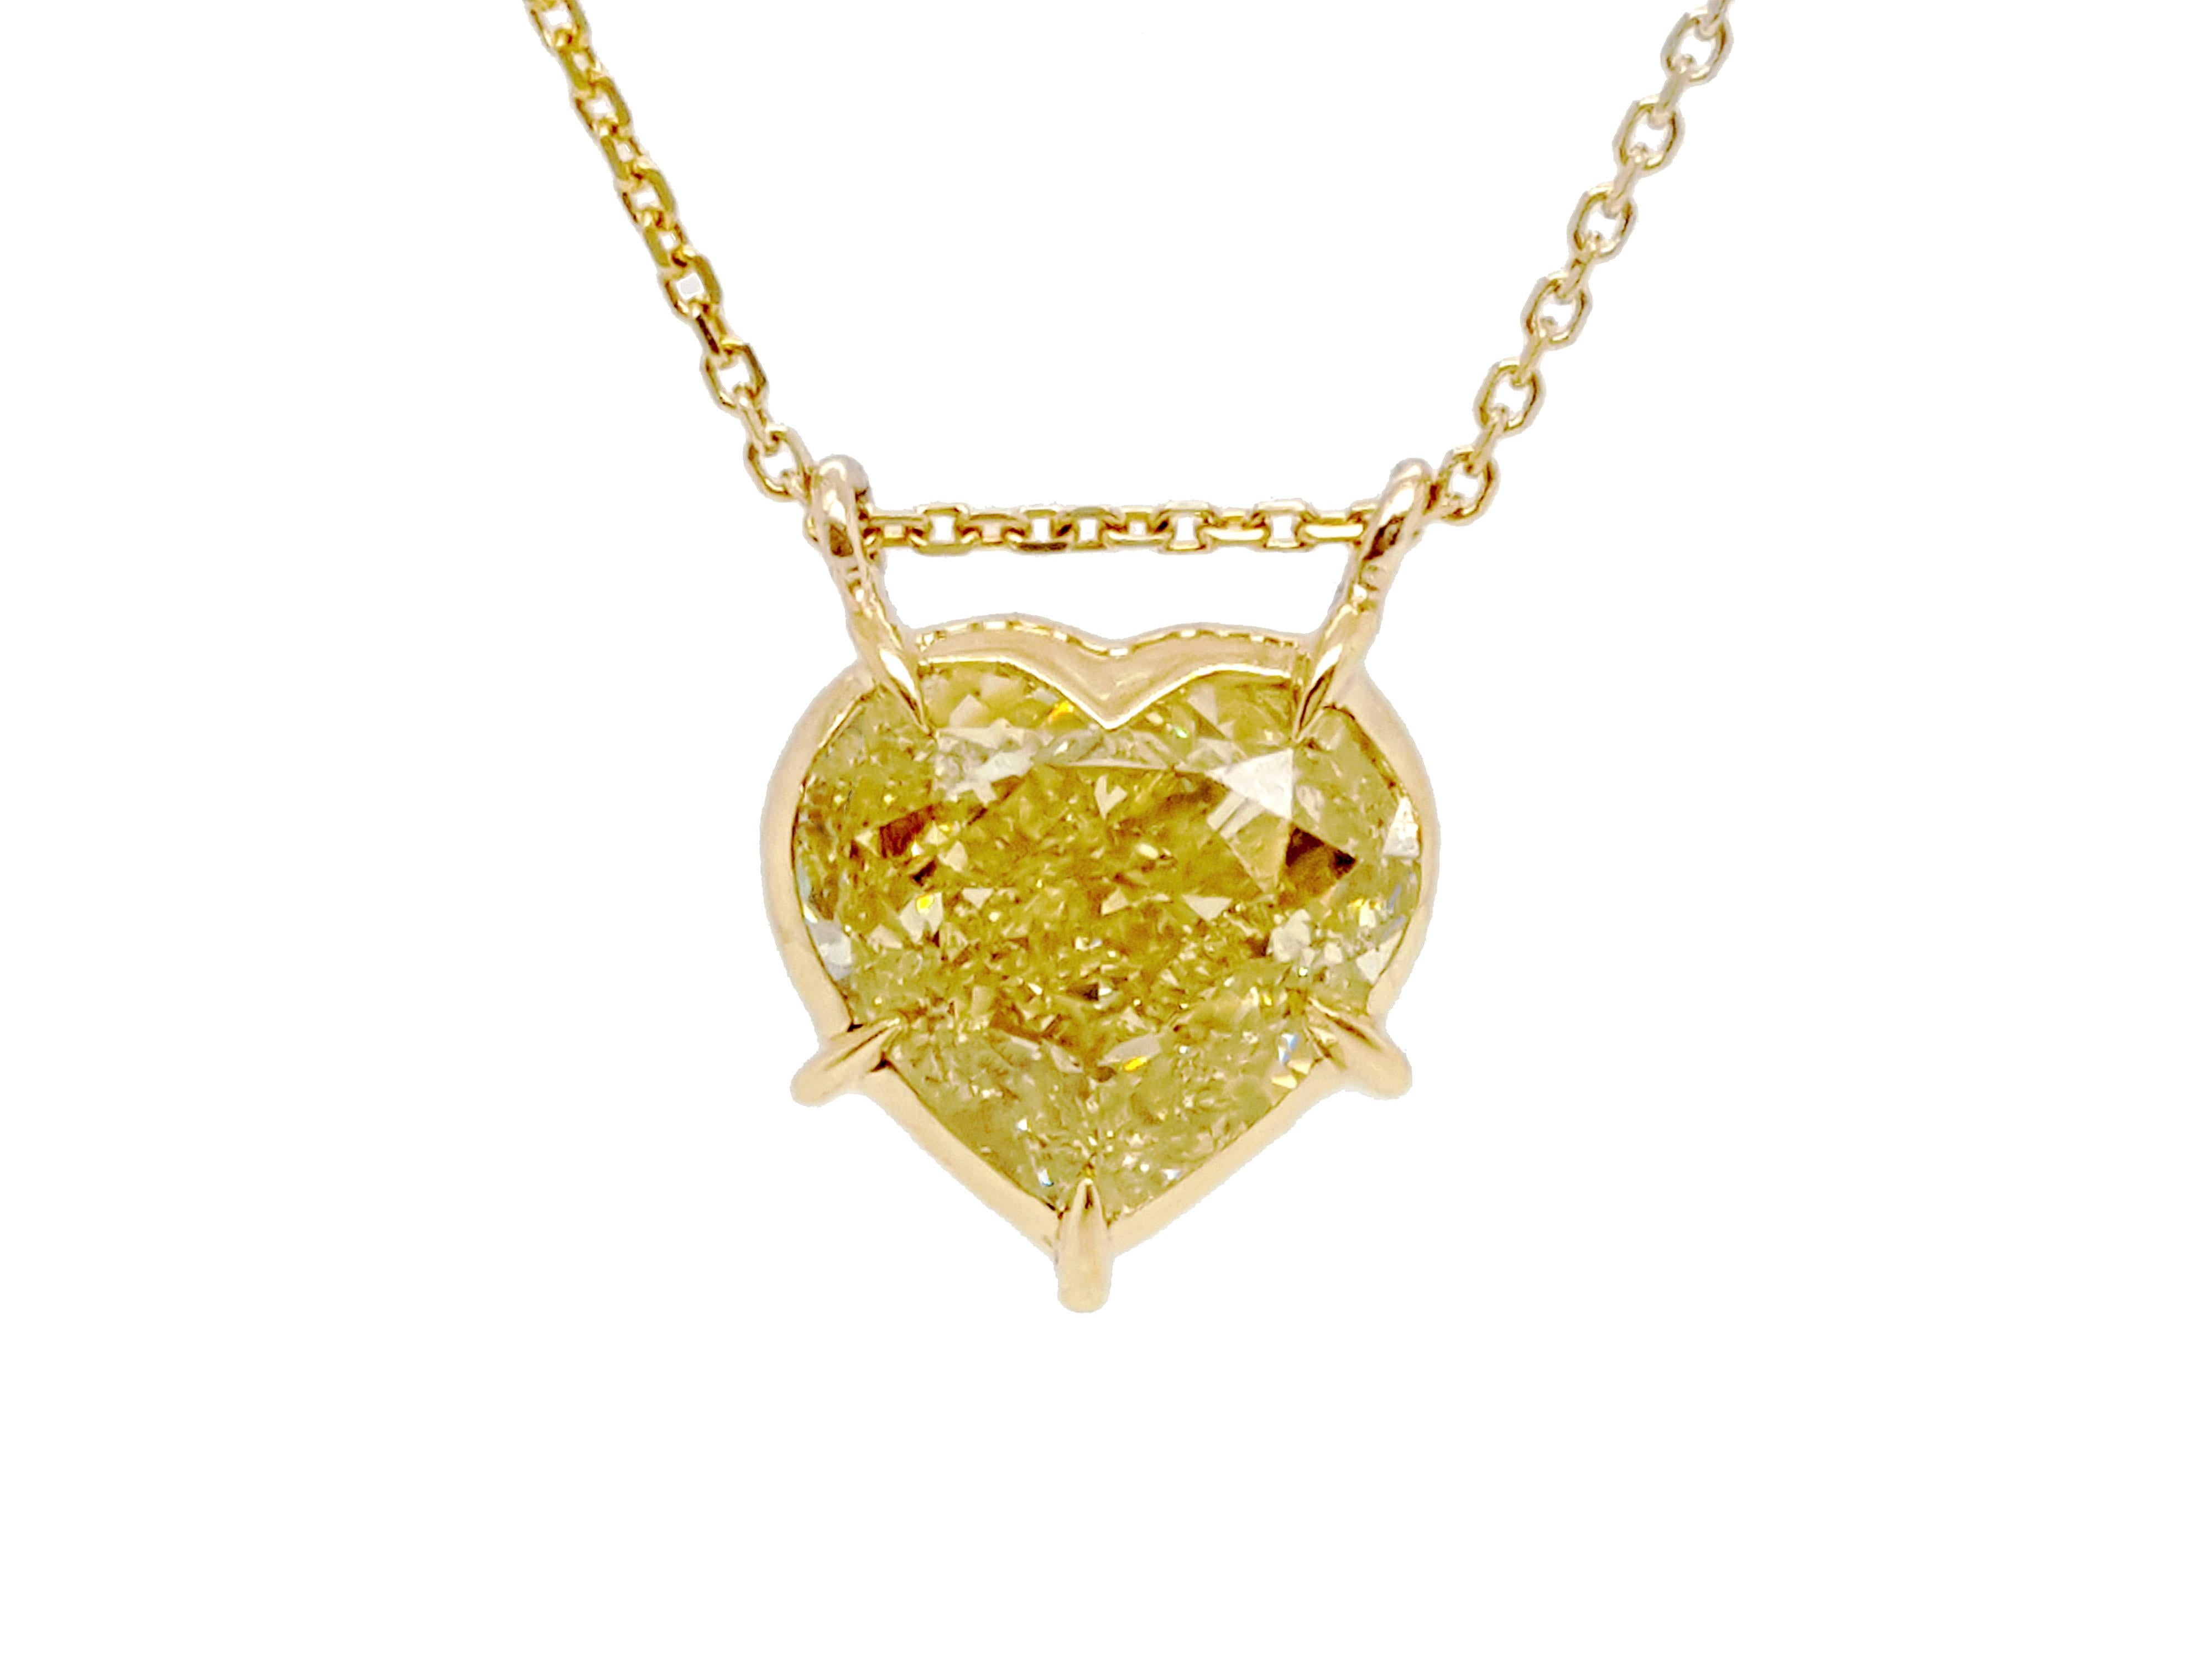 Featuring a stunning a 5.17 carat heart shaped Fancy Yellow color diamond pendant. certified by GIA as VVS2 clarity. Cut and shaped by our master cutters this diamond has a beautiful symmetric shape with the heart well defined. The pendant is